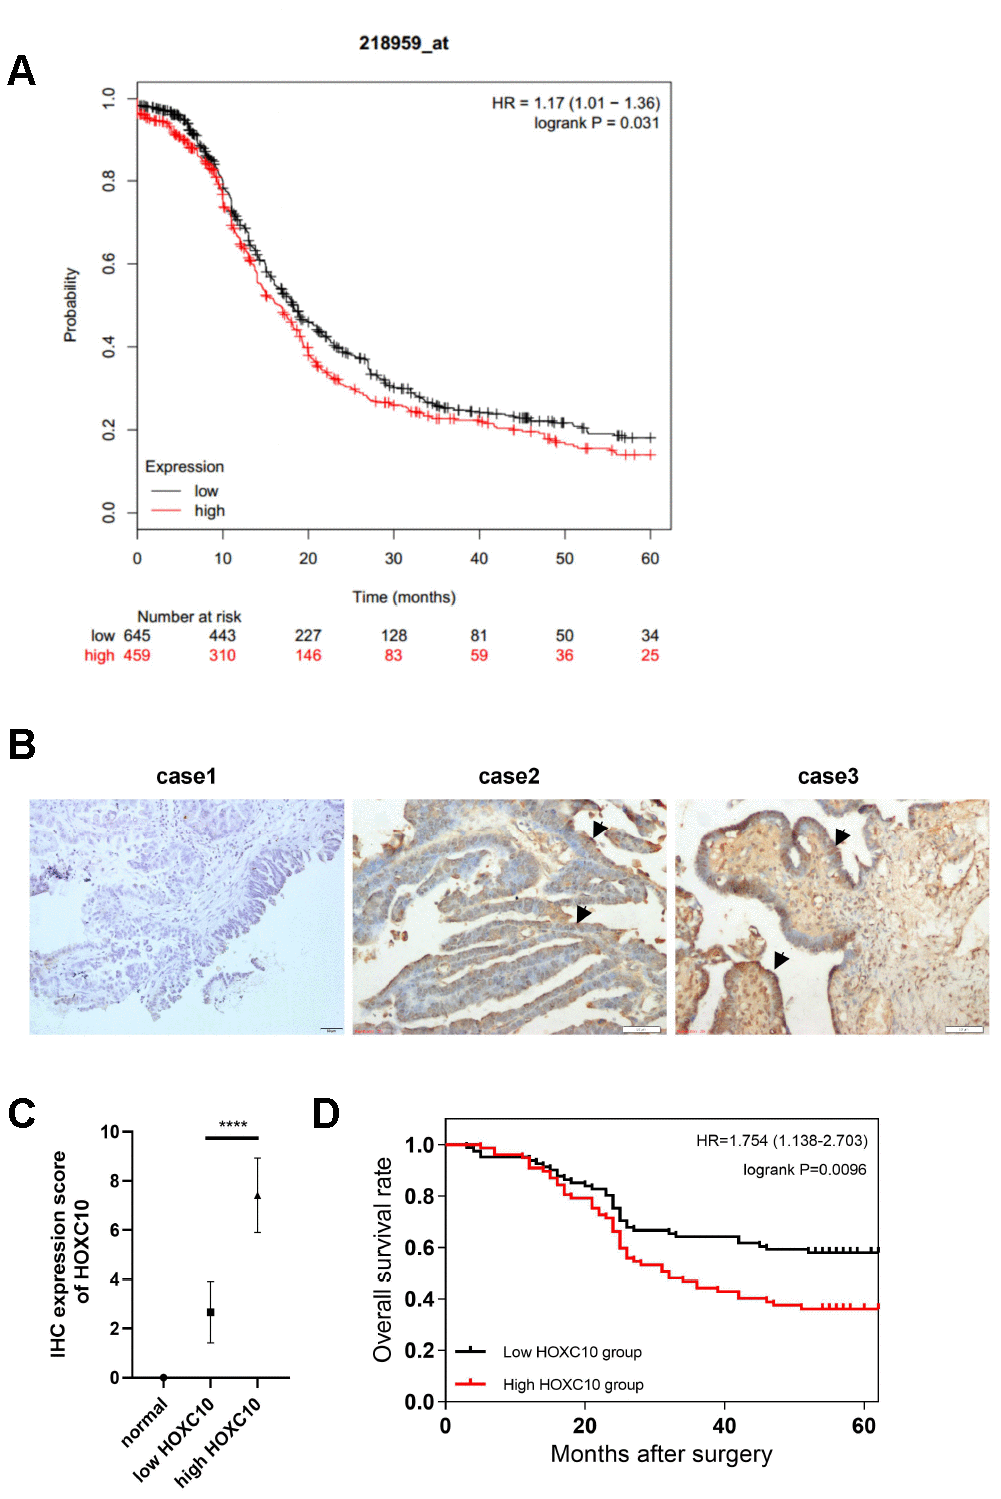 Overexpression of HOXC10 is associated with poor prognosis in OC patients. (A) Kaplan-Meier survival curves for OC patients (PFS; n = 1207). HR=1.17, P=0.031. (B) HOXC10 protein expression in normal ovarian tissues (case 1) and OC patient tissues (case 2, low expression of HOXC10; case 3, high expression of HOXC10) was assessed by IHC staining. Scale bars, 50 μm. (C) IHC positive rate scores for HOXC10 in normal tissues and each group of OC patient tissues. PD) Kaplan-Meier survival curves for 158 OC patients. HR=1.754, P=0.0096.